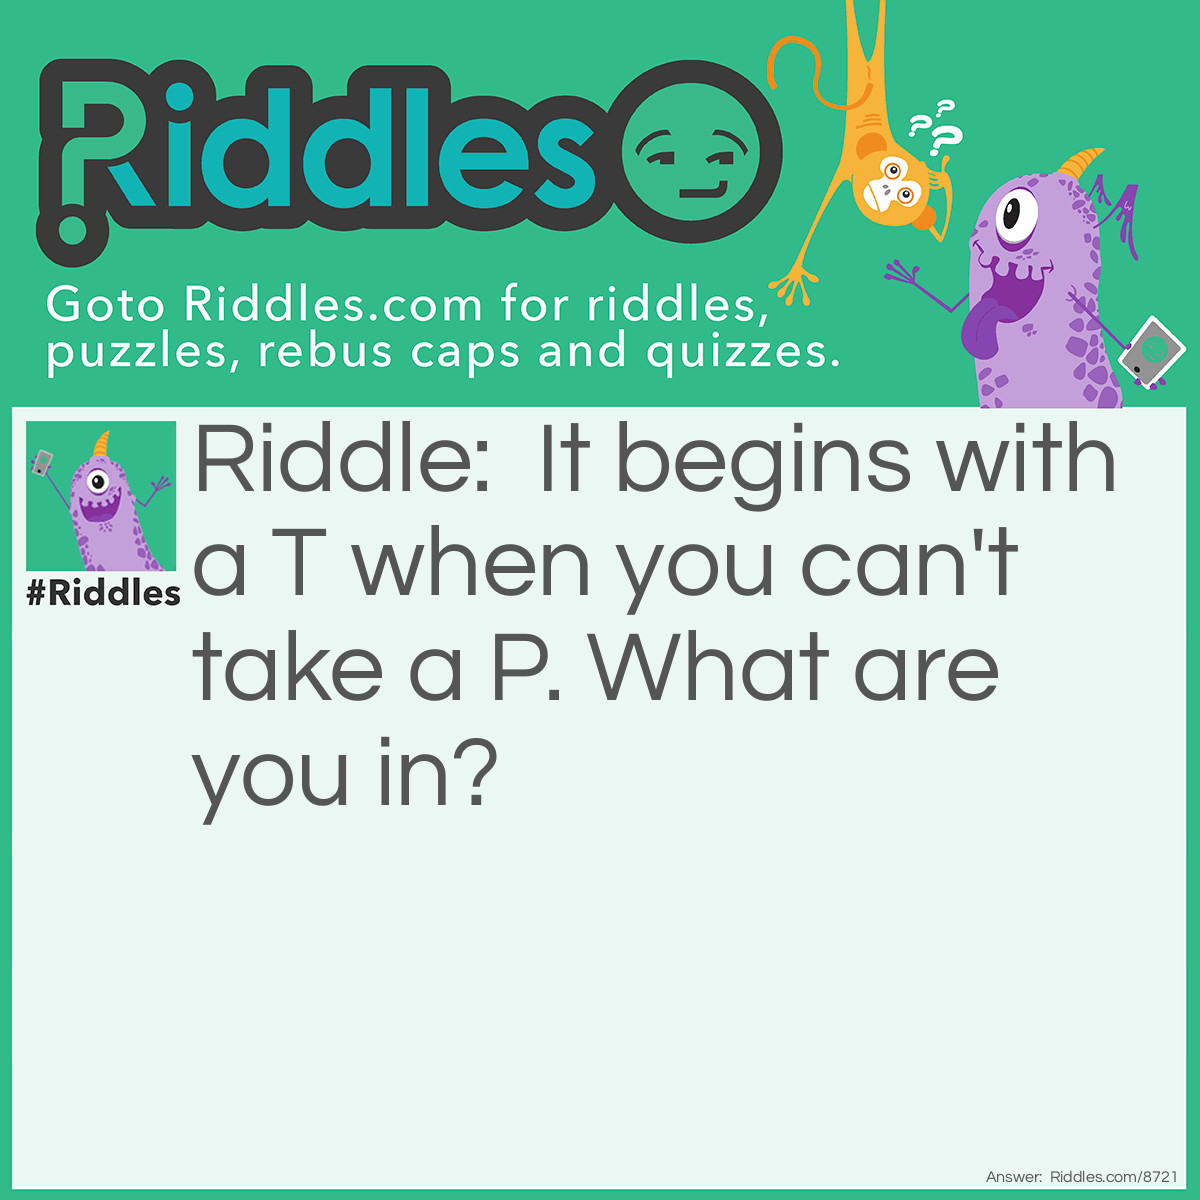 Riddle: It begins with a T when you can't take a P. What are you in? Answer: You're in Trouble.